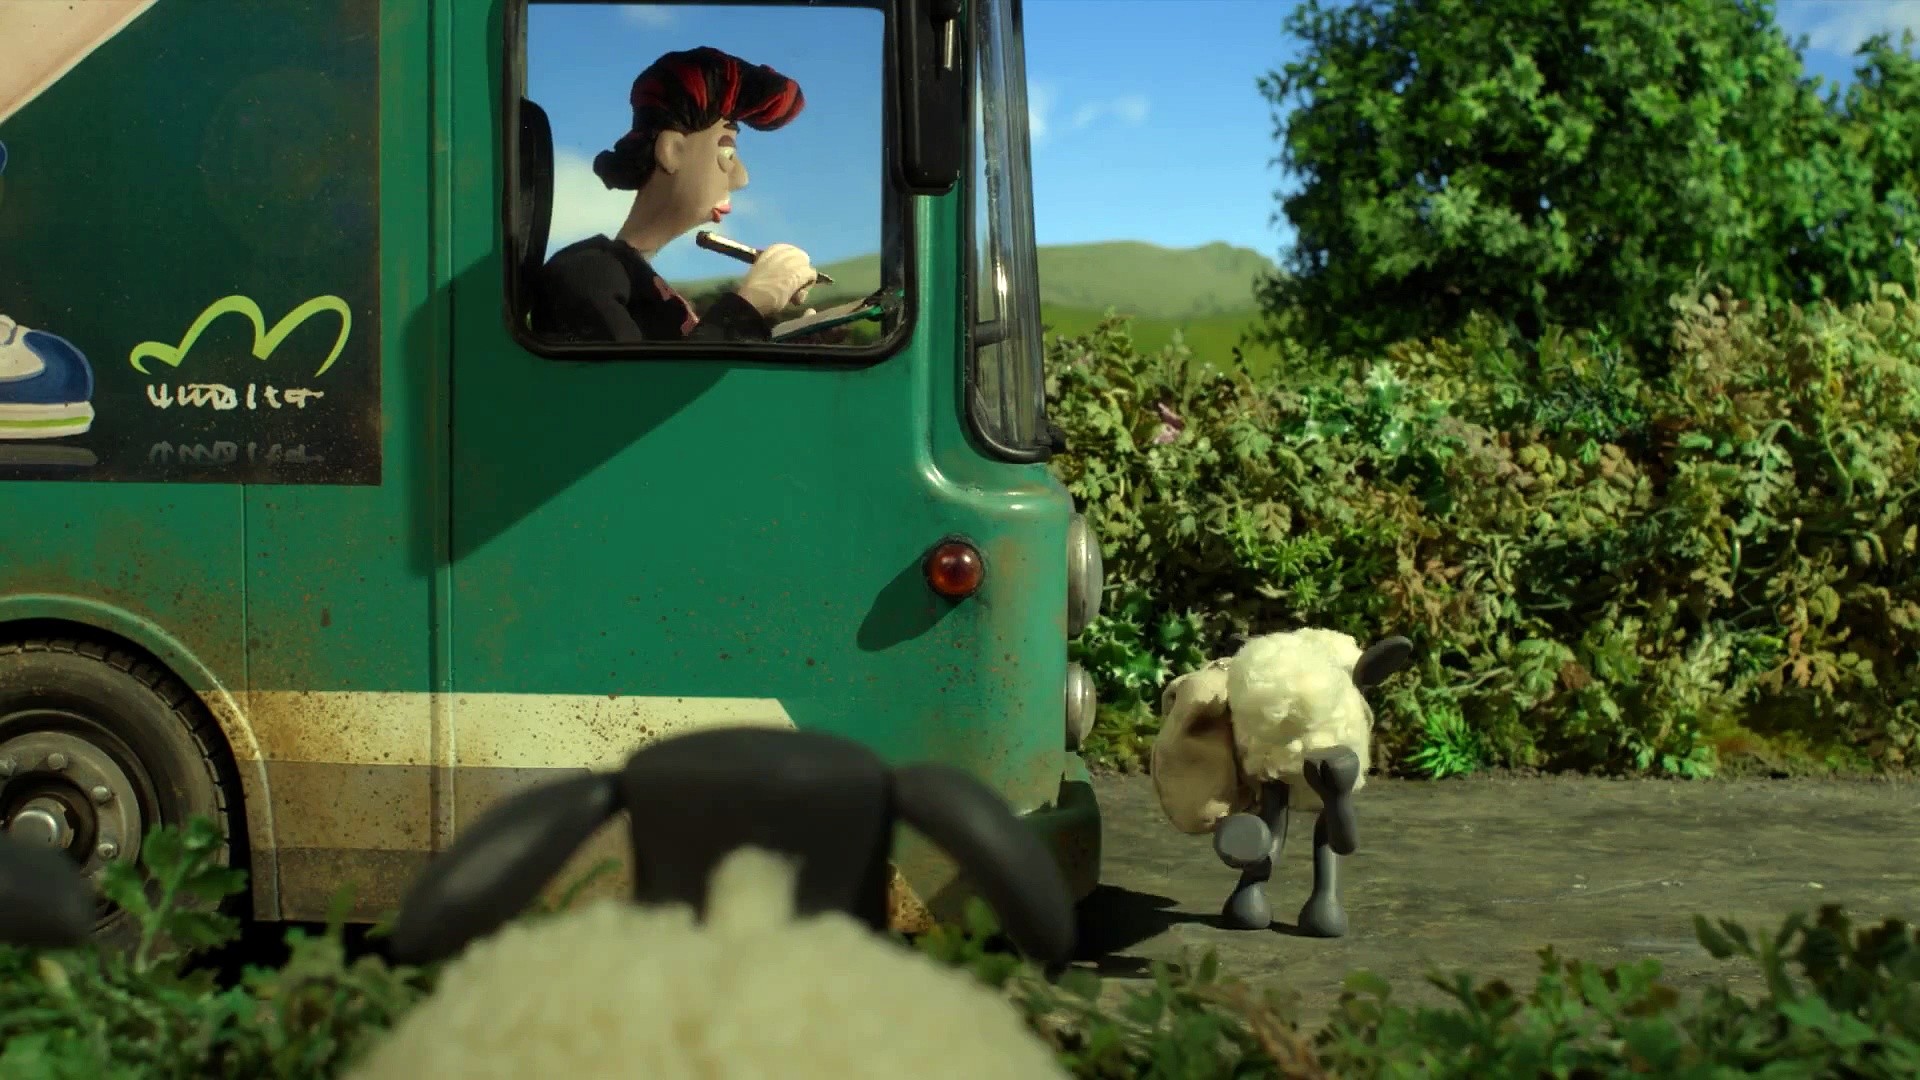 1920x1080 On the surface, Shaun The Sheep: The Movie doesn't seem particularly  groundbreaking. After all, it looks like yet another kid-focussed animated  movie about ...